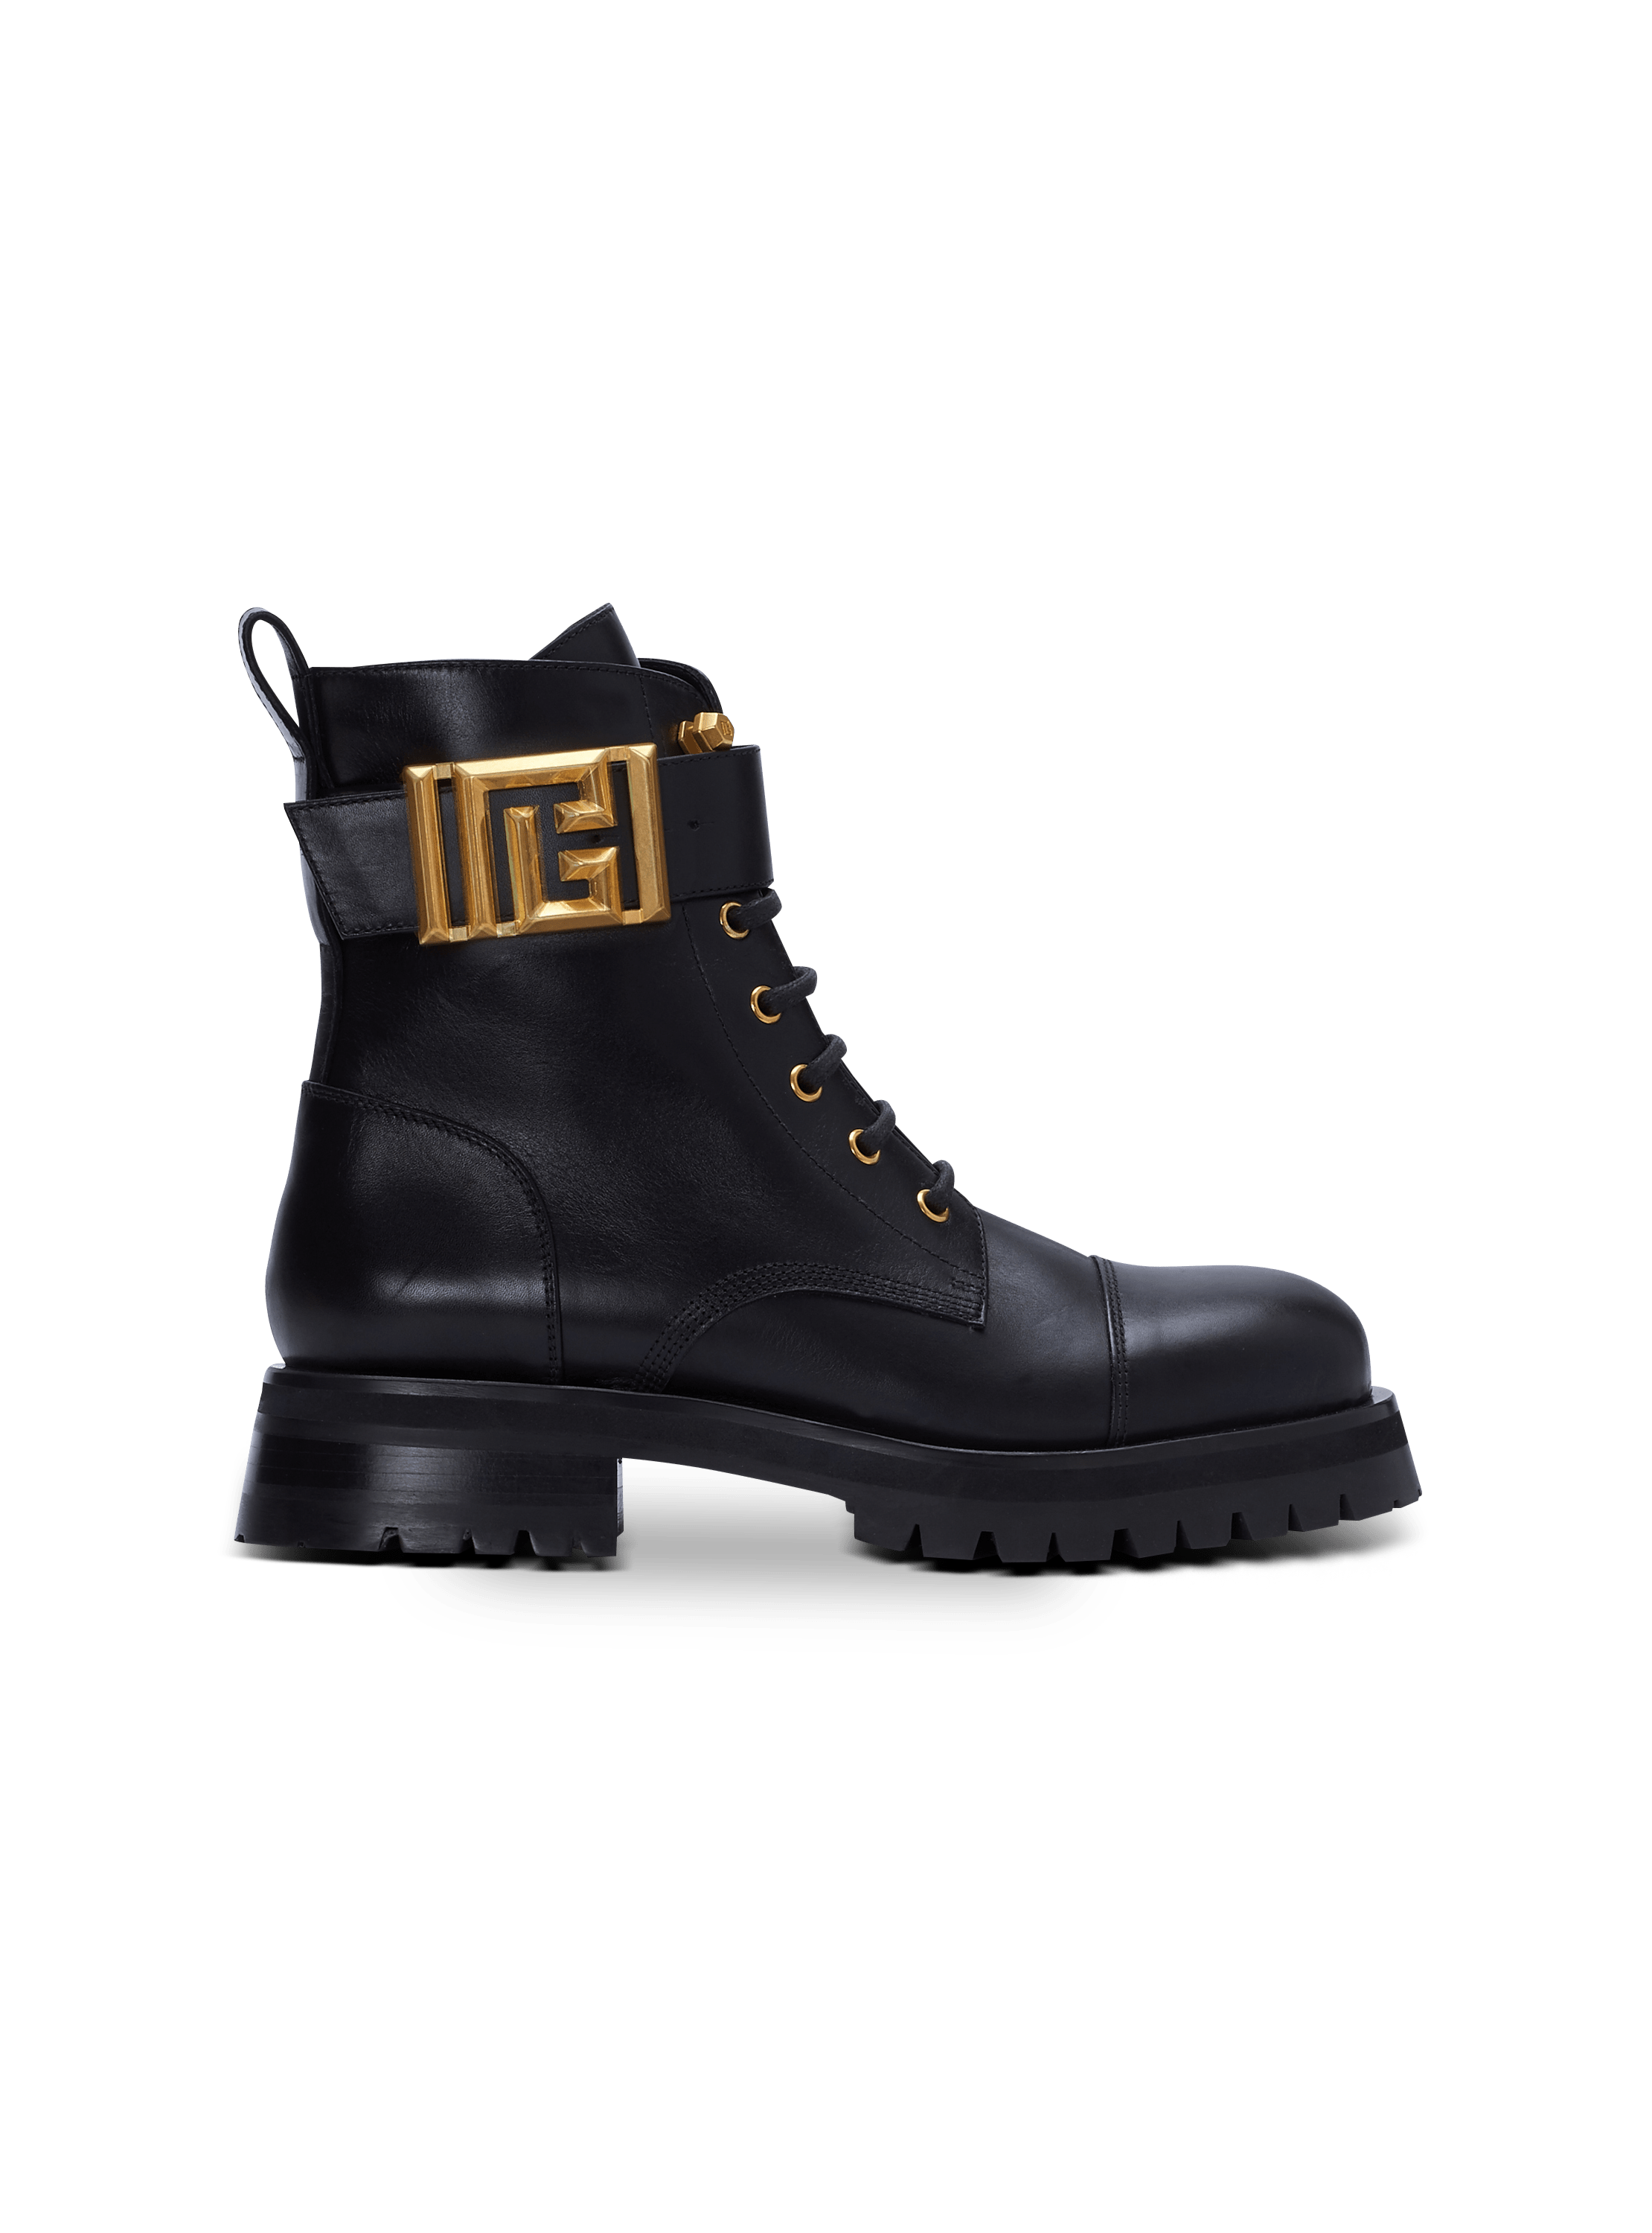 Romy leather army boots, black, hi-res